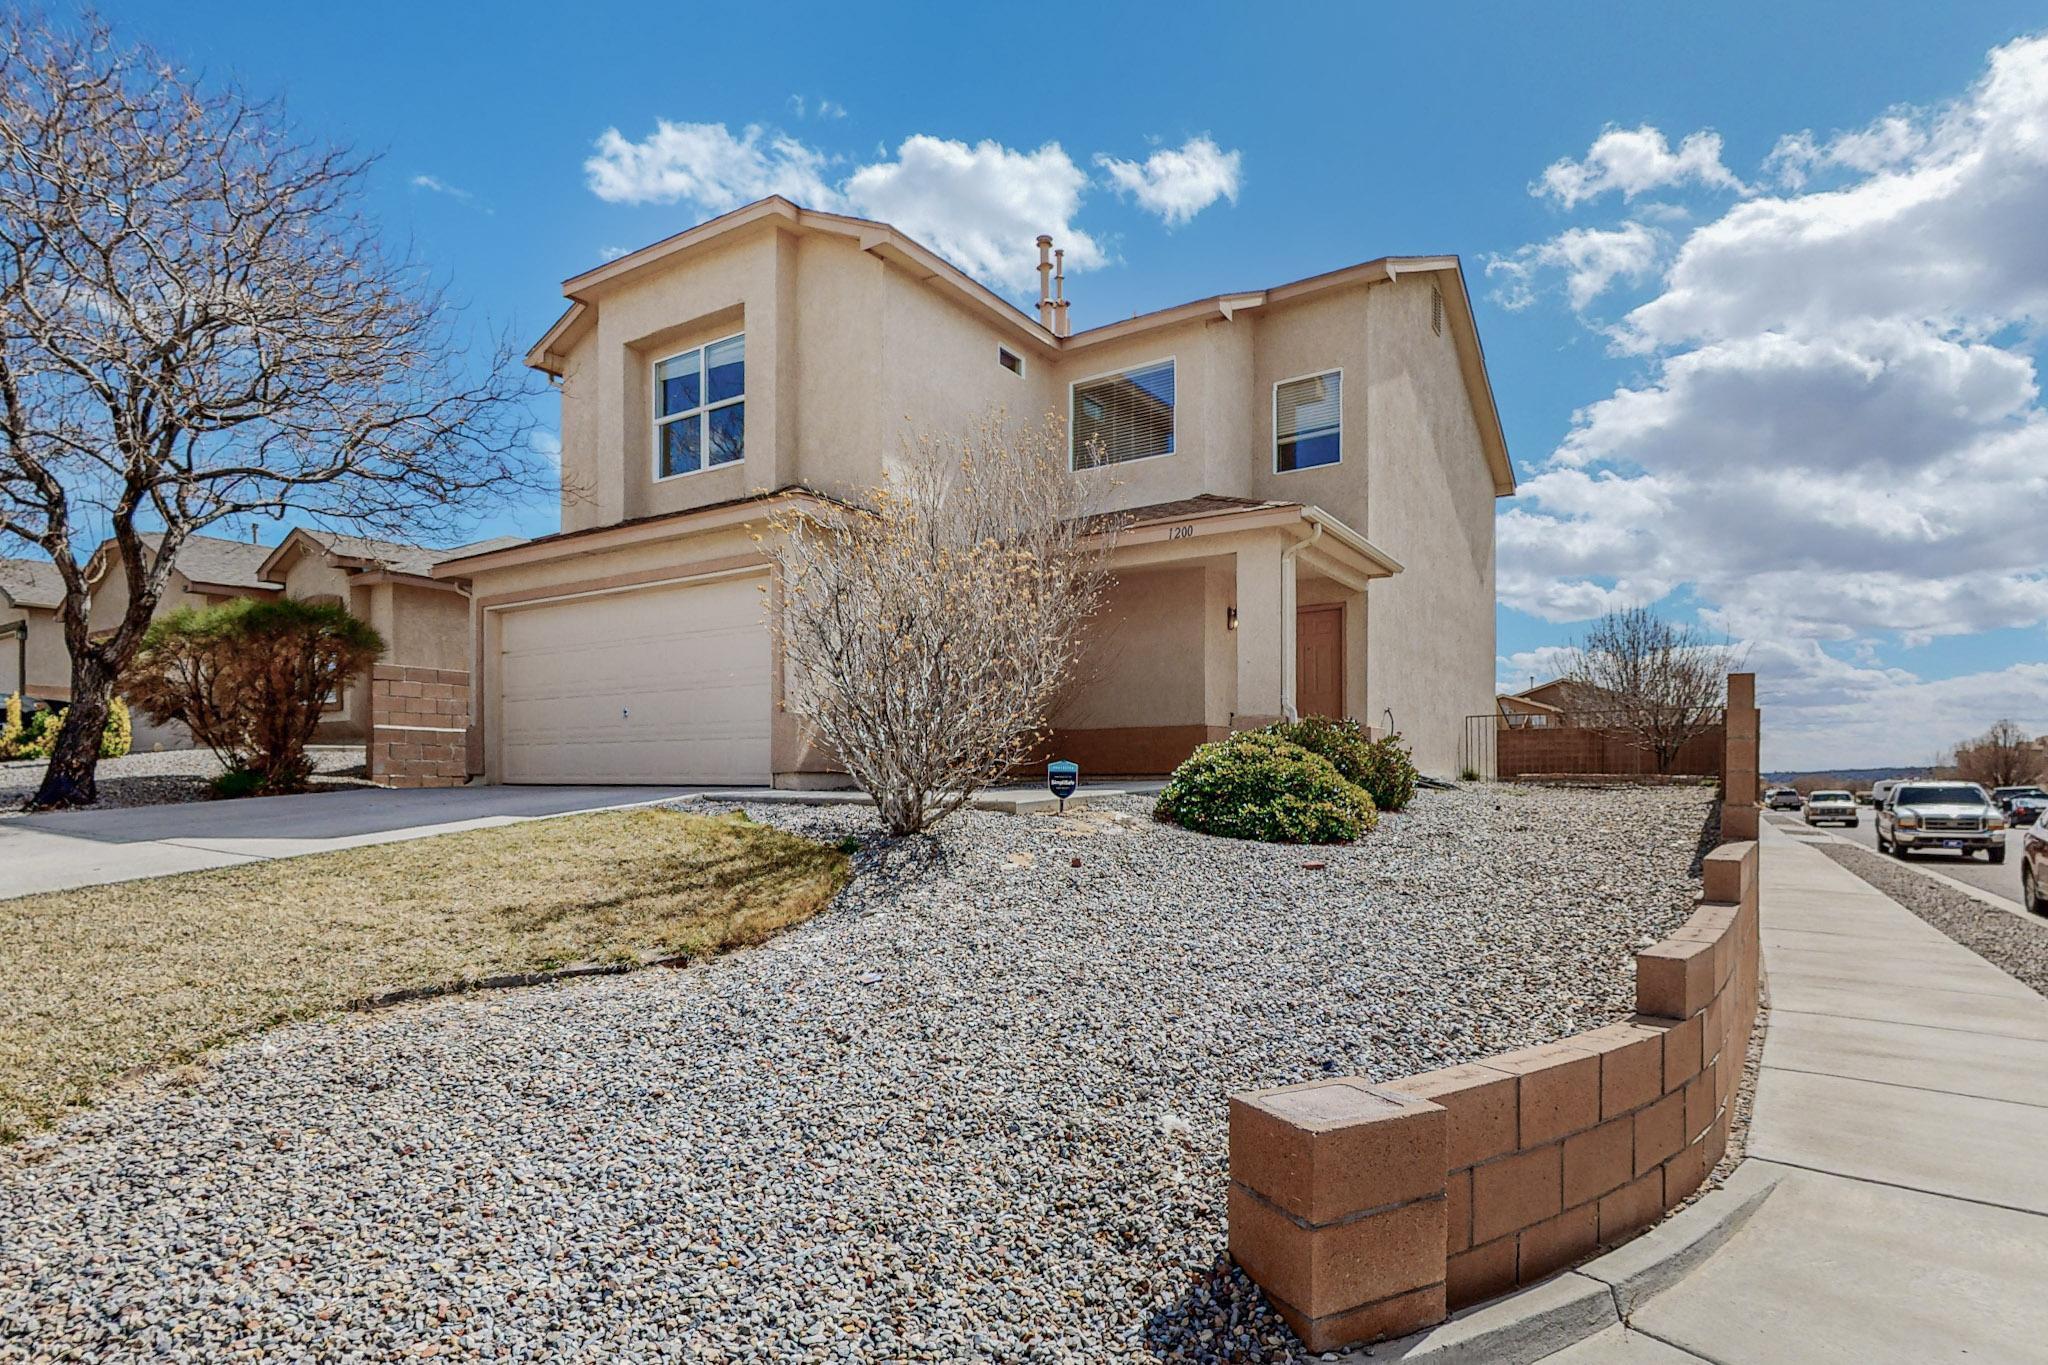 Welcome to the serene neighborhood of Northern Meadows! This 3 bedroom, 2.5 bathroom home is located on a quiet corner lot, just steps away from Havasu Park and several access points to the trail system that runs through the community. All bedrooms are located on the upstairs floor, including the large primary suite that is equipped with a huge walk in closet that is sure to delight you! The loft space is perfect as an additional family room, office, or gym space!  This home is ready for your personal touches to make it shine! The seller is offering a $5K carpet credit at closing with an acceptable offer.  If you are looking for a neighborhood with a sense of community, look no further, you have found your future home!